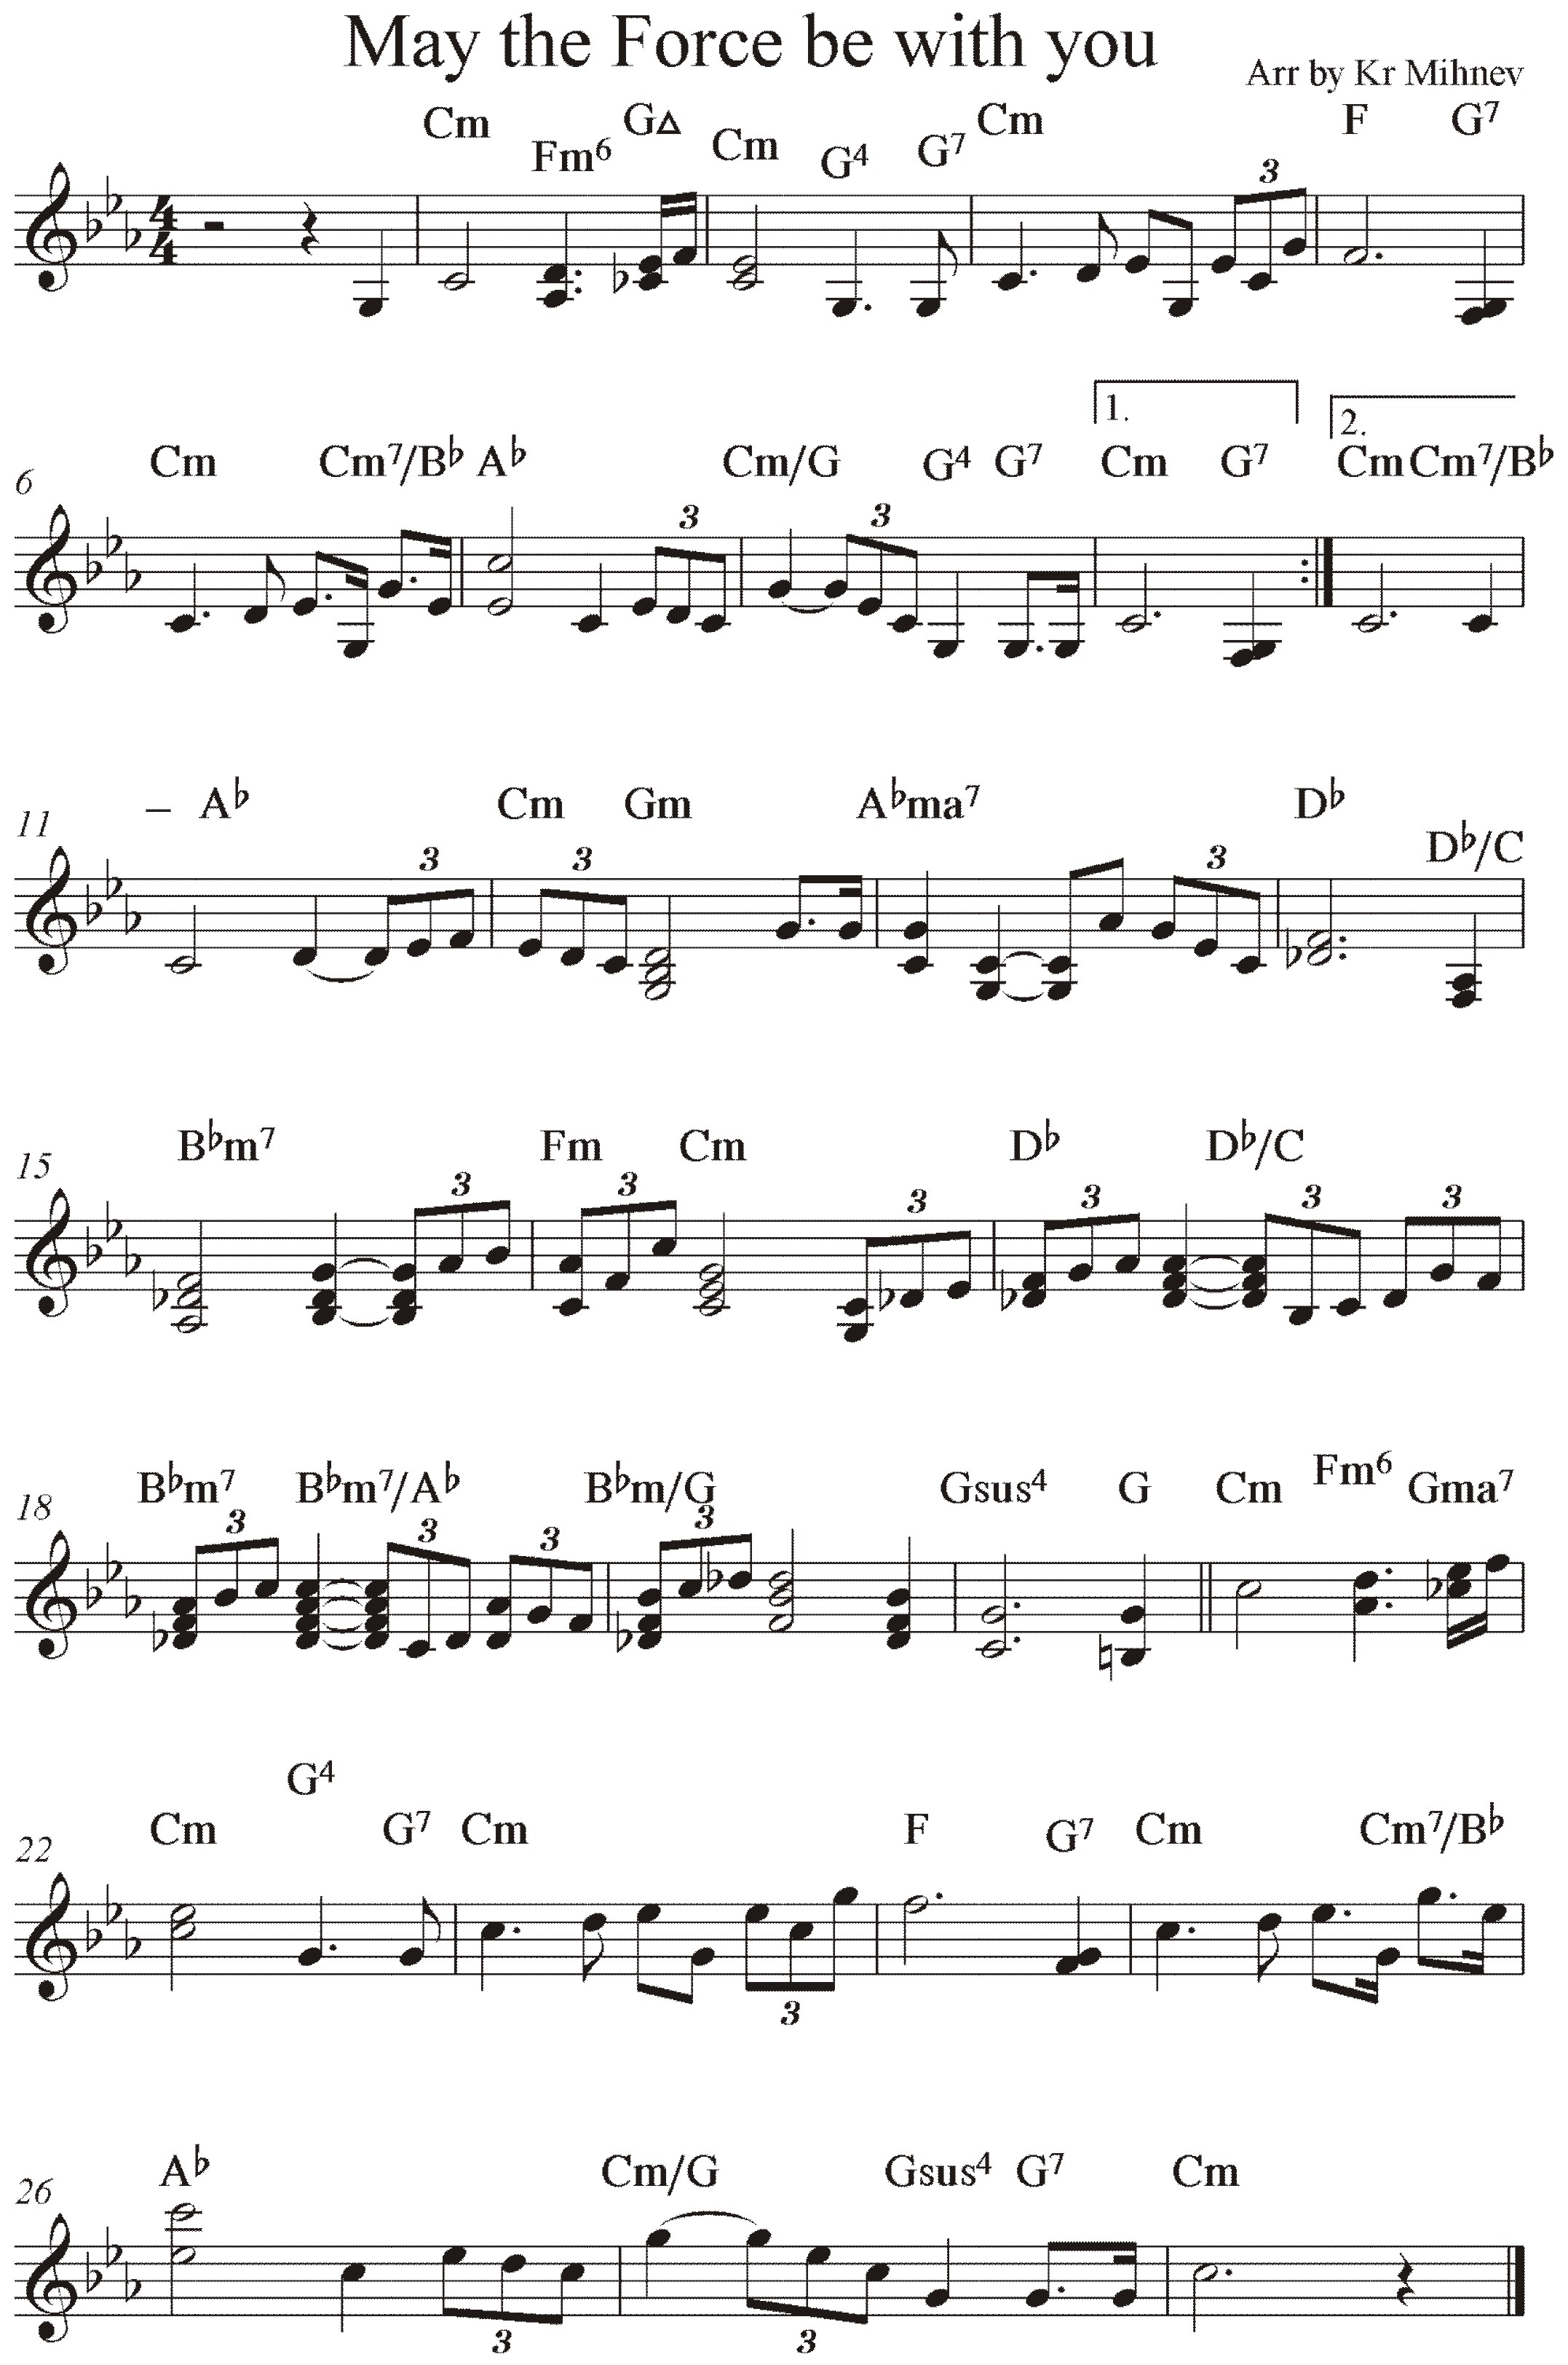 Click to download "May the Force be with you" sheet music, page 1